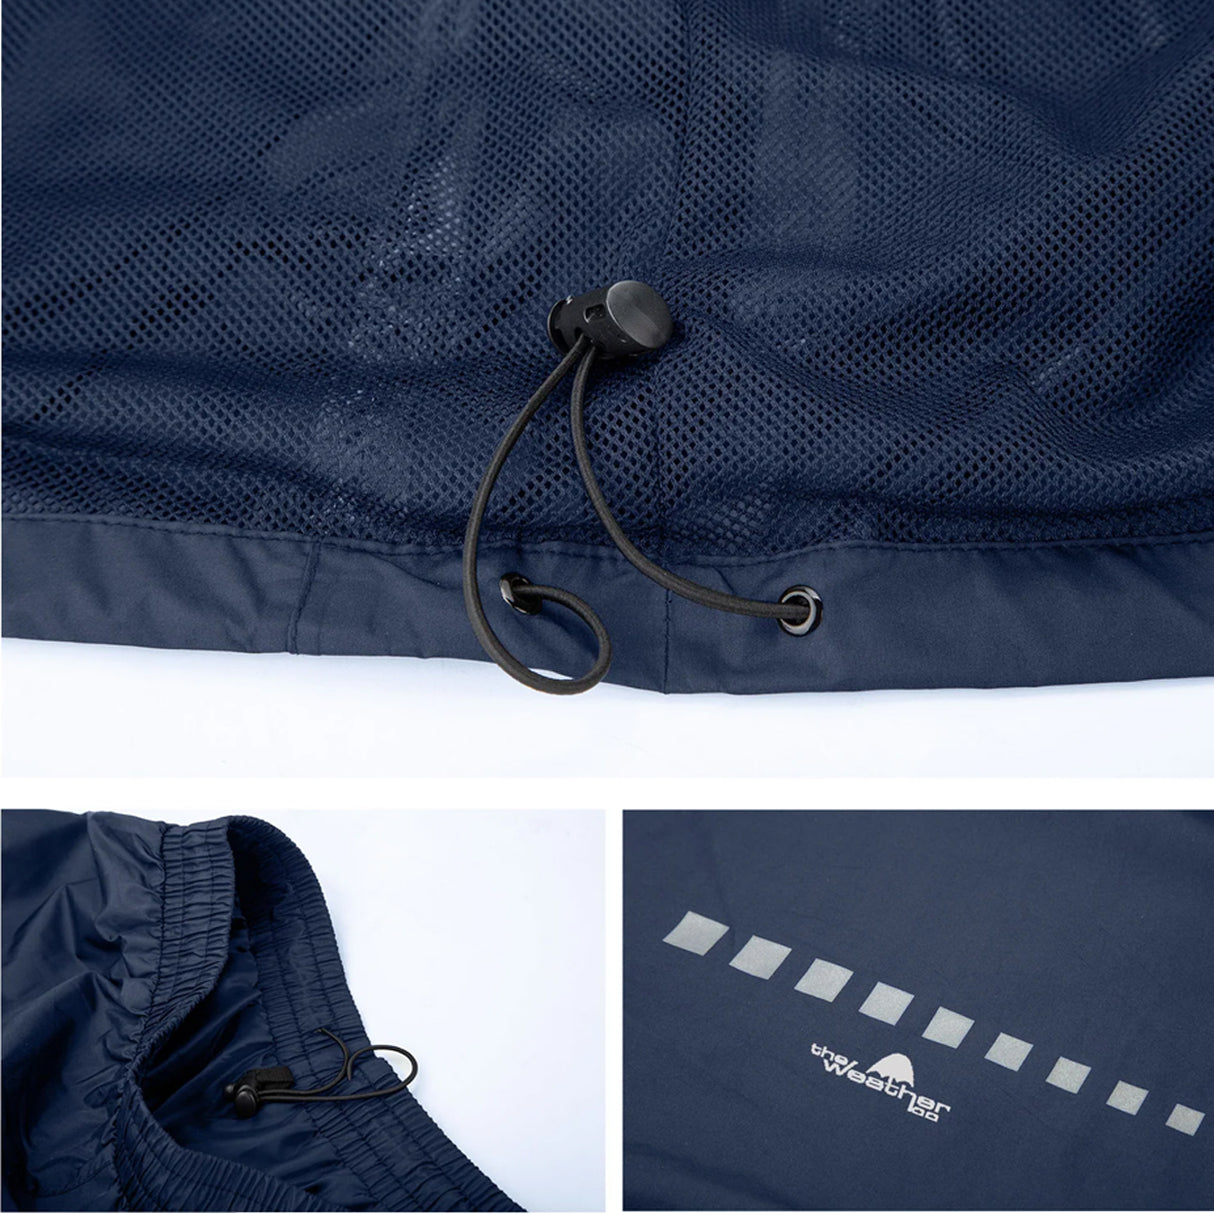 The Weather Company Waterproof Hooded Golf Rain Suit